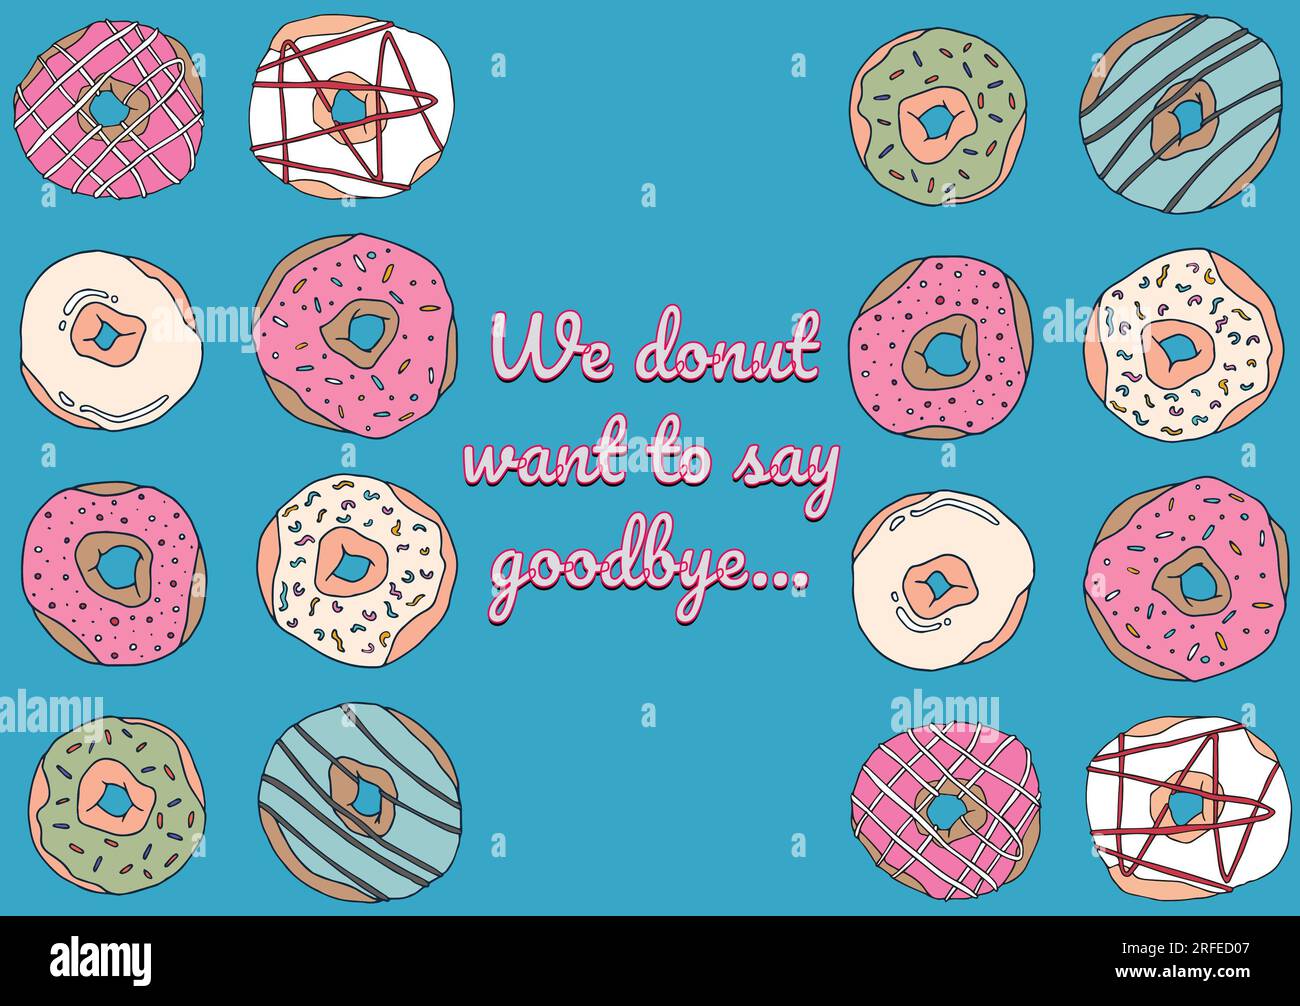 Illustration Of We Donut Want To Say Goodbye Text With Various Donuts On Blue Background Stock